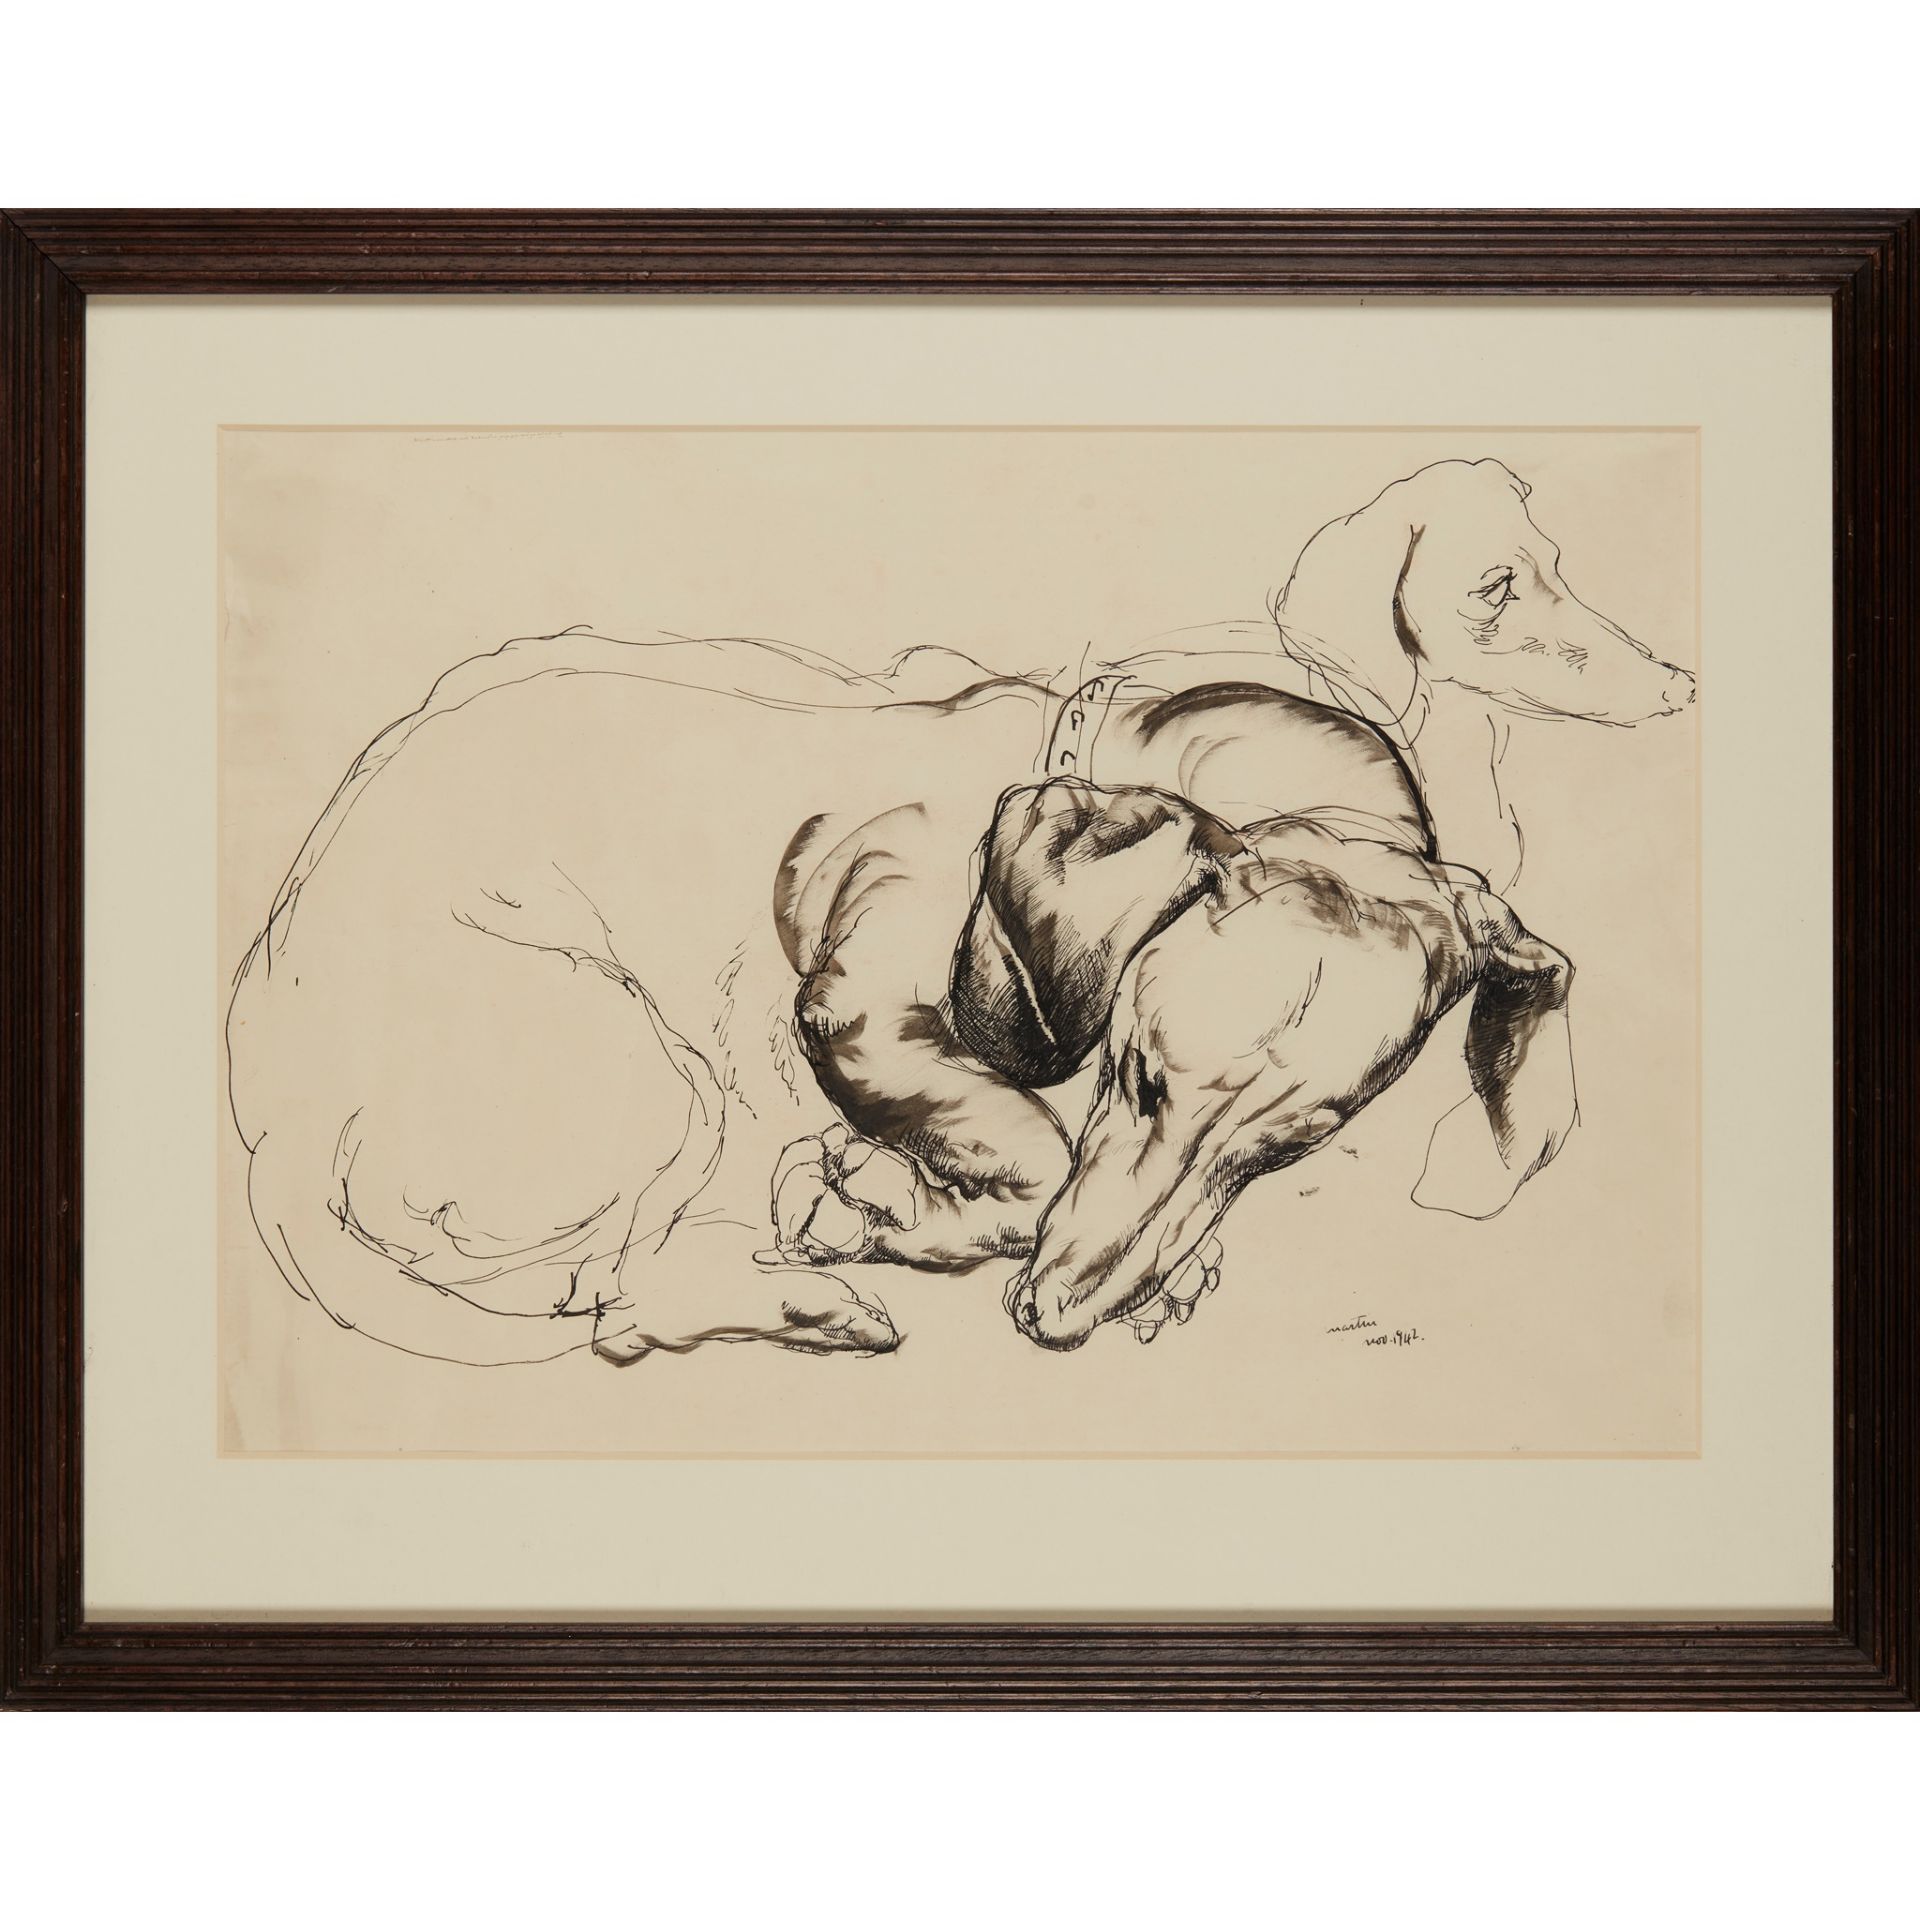 § WILLIAM CROSBIE R.S.A. (SCOTTISH 1915-1999) DACHSHUNDS LYING ('MARTIN') - Image 2 of 3